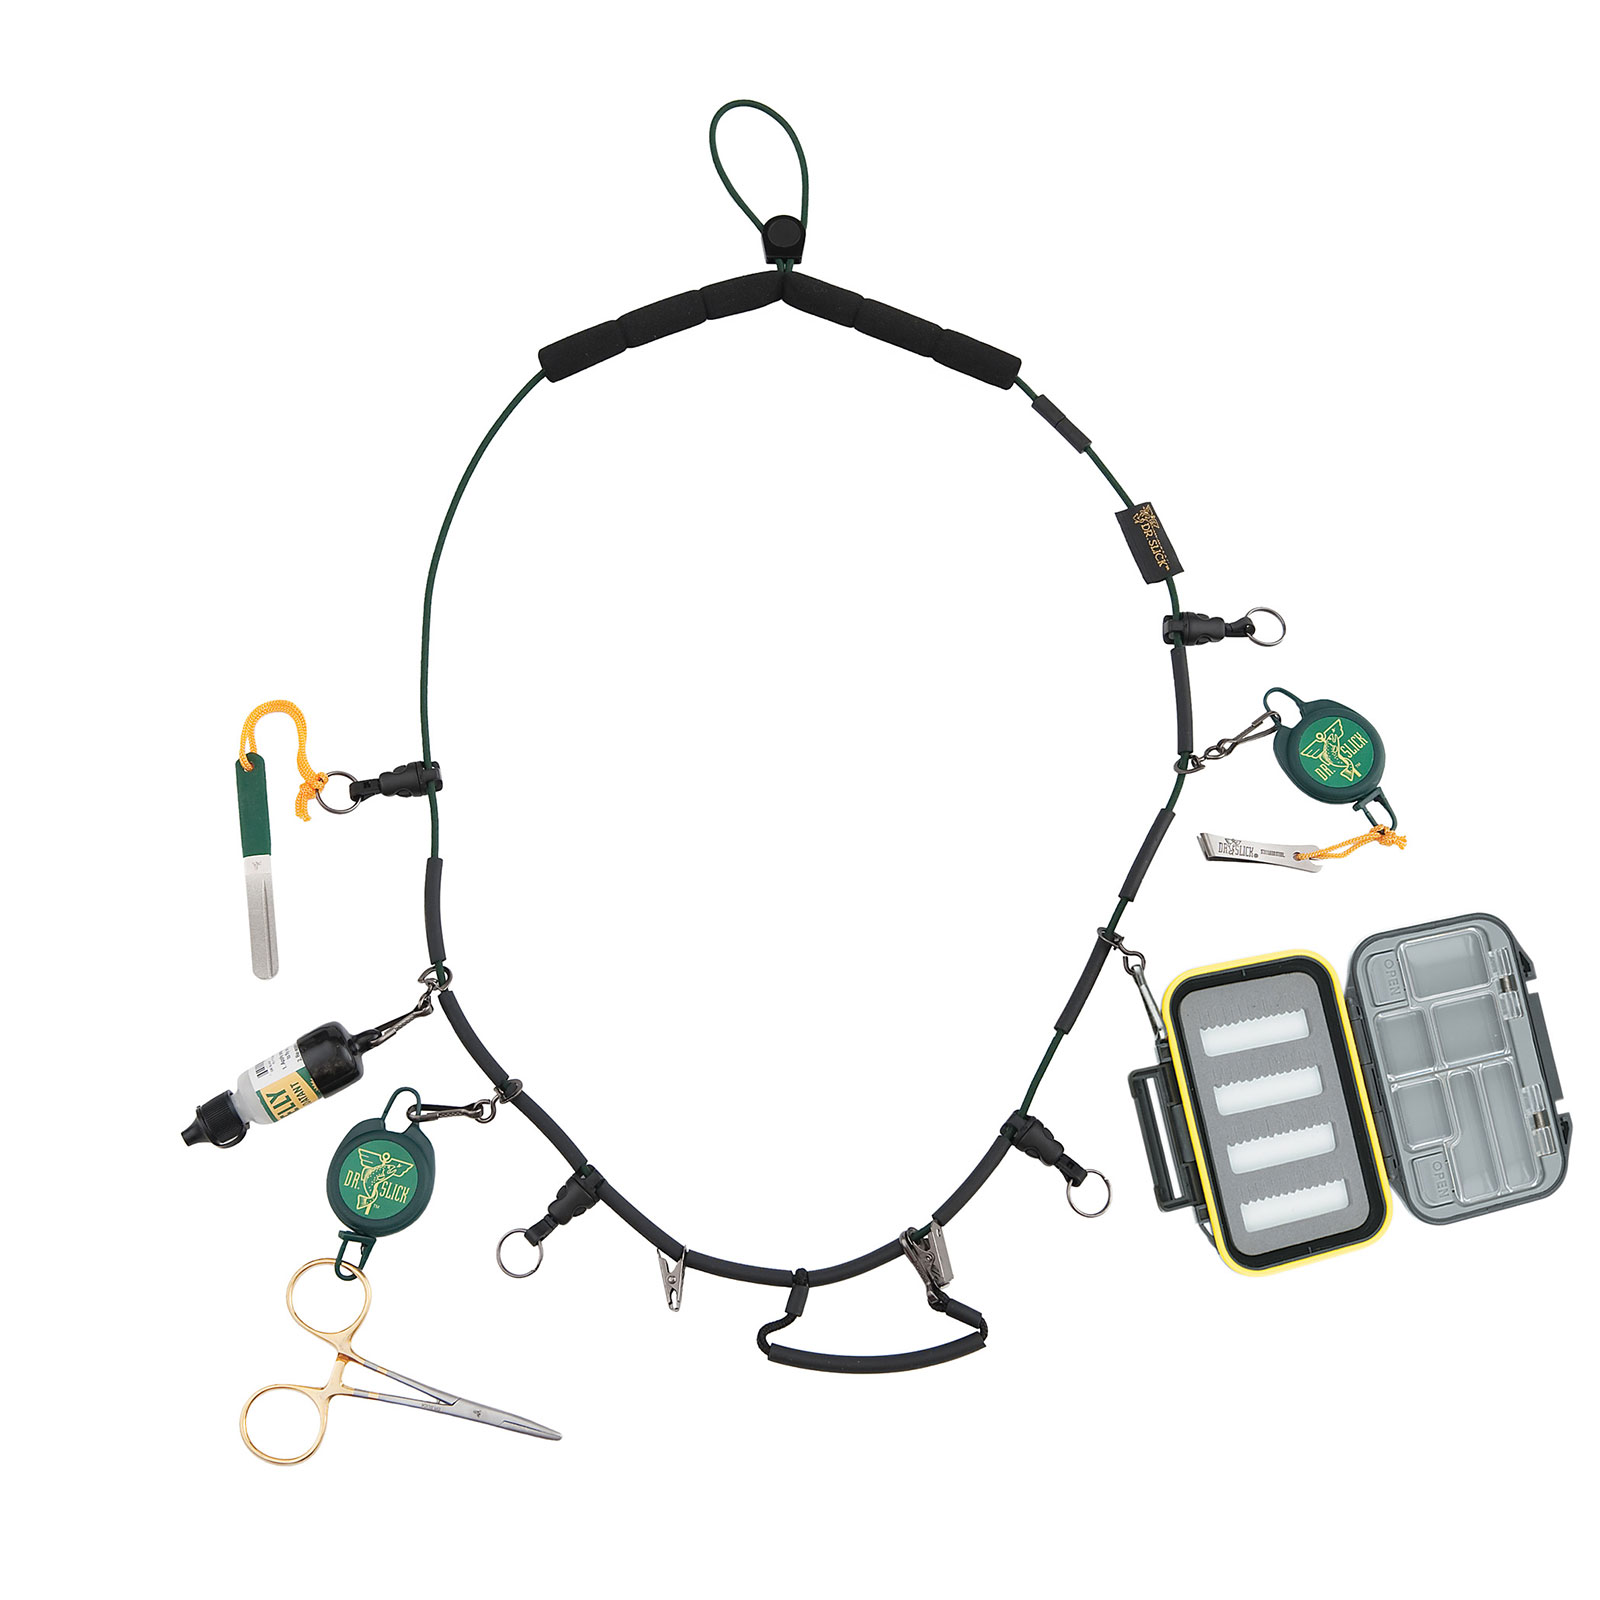 Dr. Slick Fisherman's Necklace Lanyard w/Tippet Spool Caddy